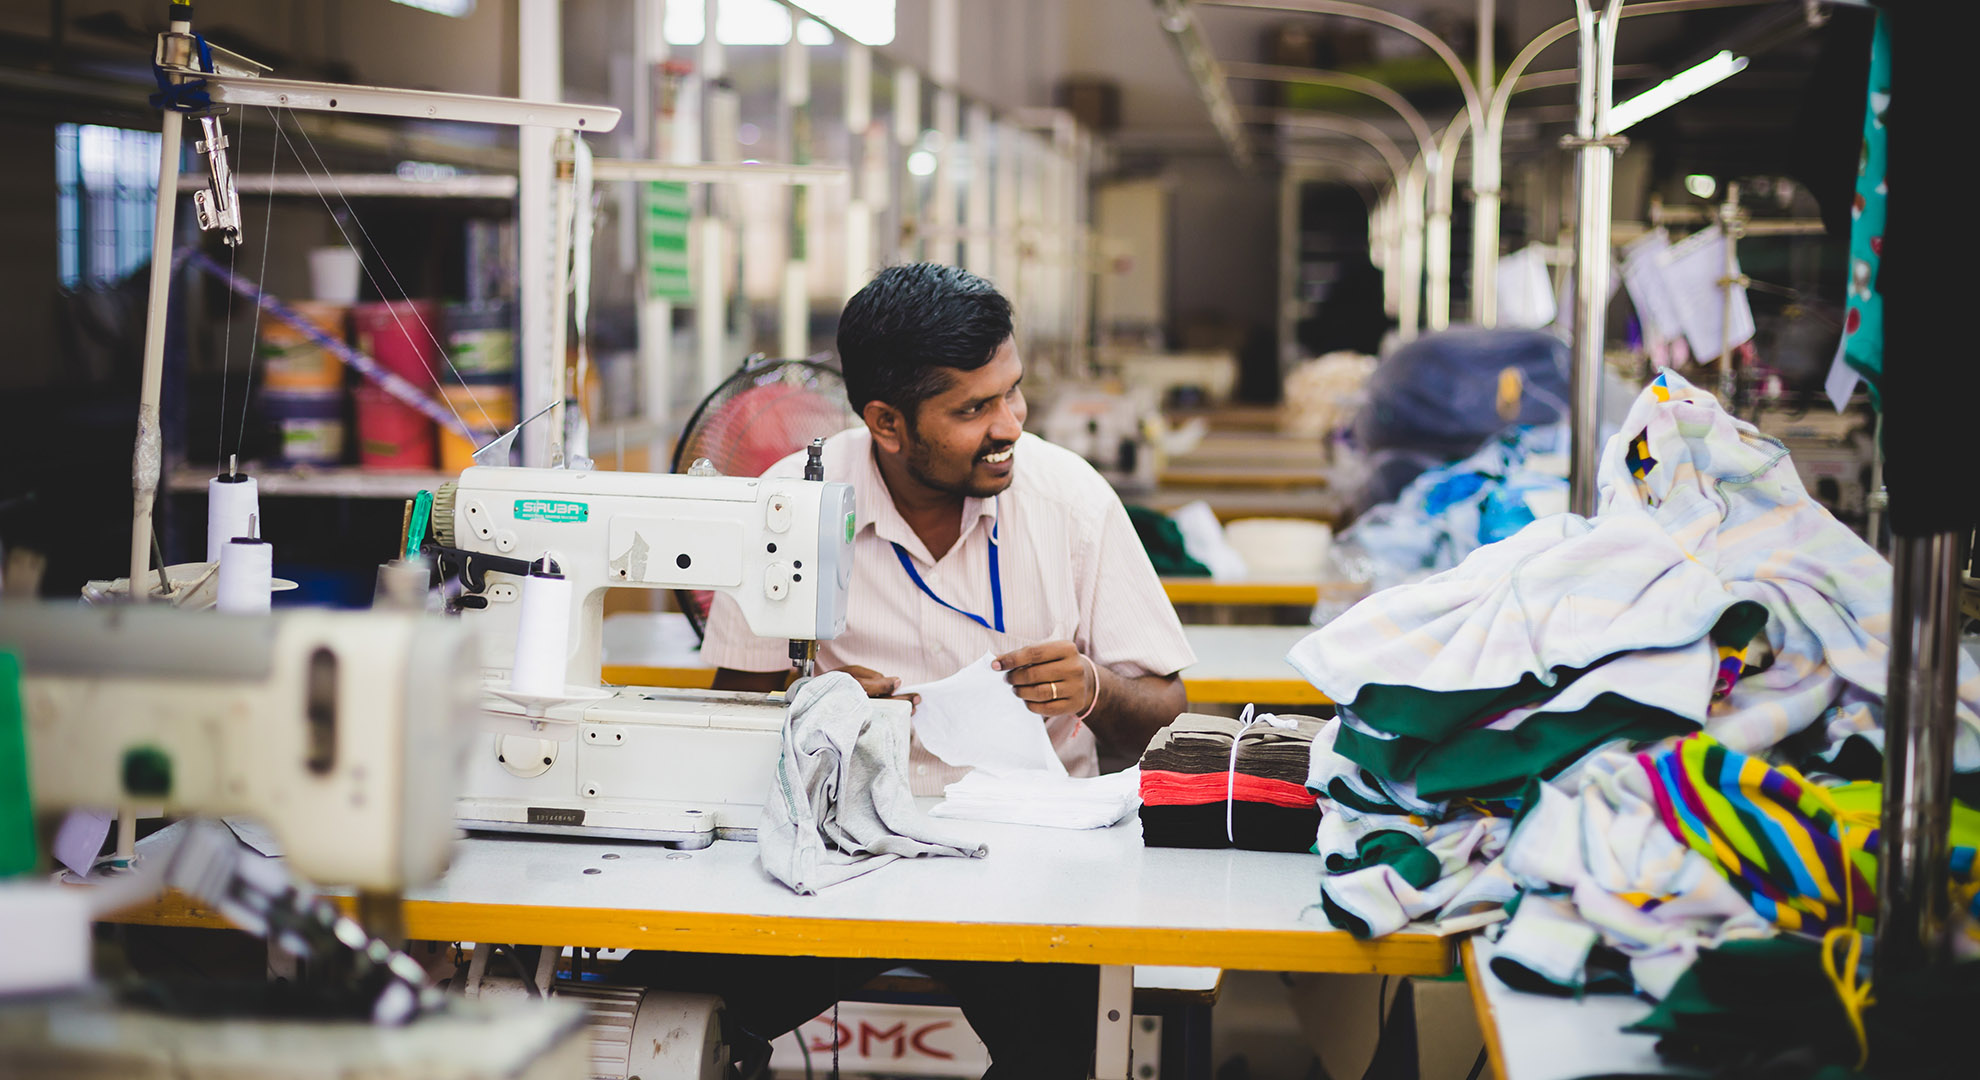 Garment Factory Worker in India. Image courtesy of Know the Origin